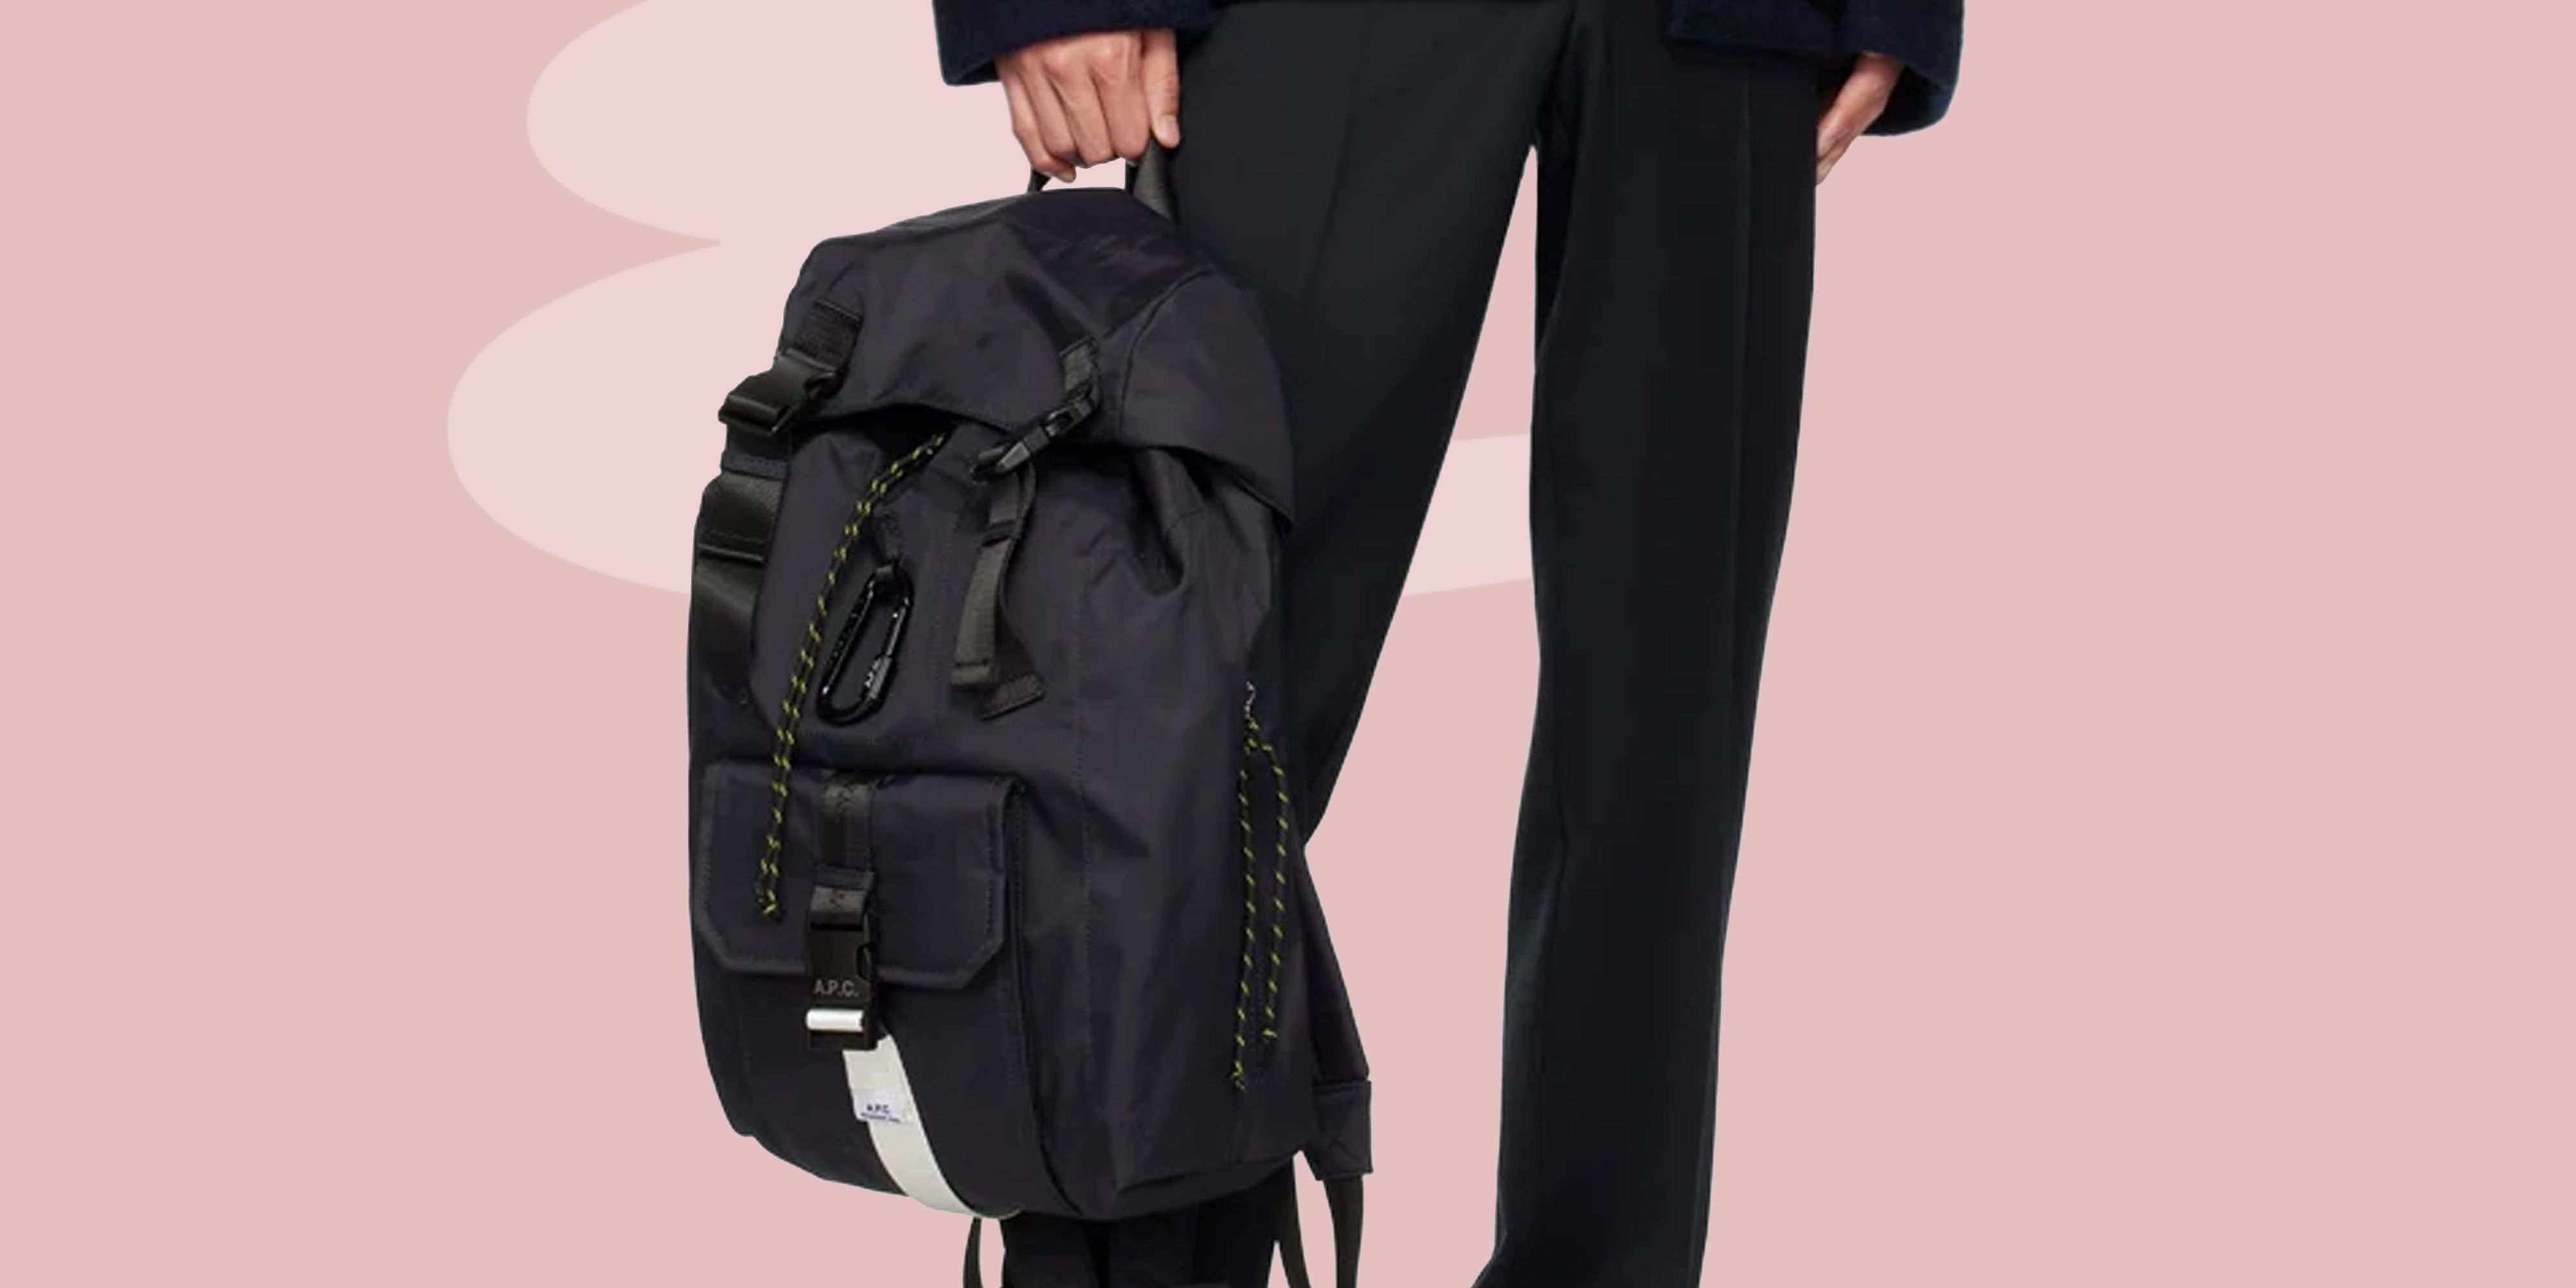 Simple And Fashionable Black College Style Multi-pocket Backpack